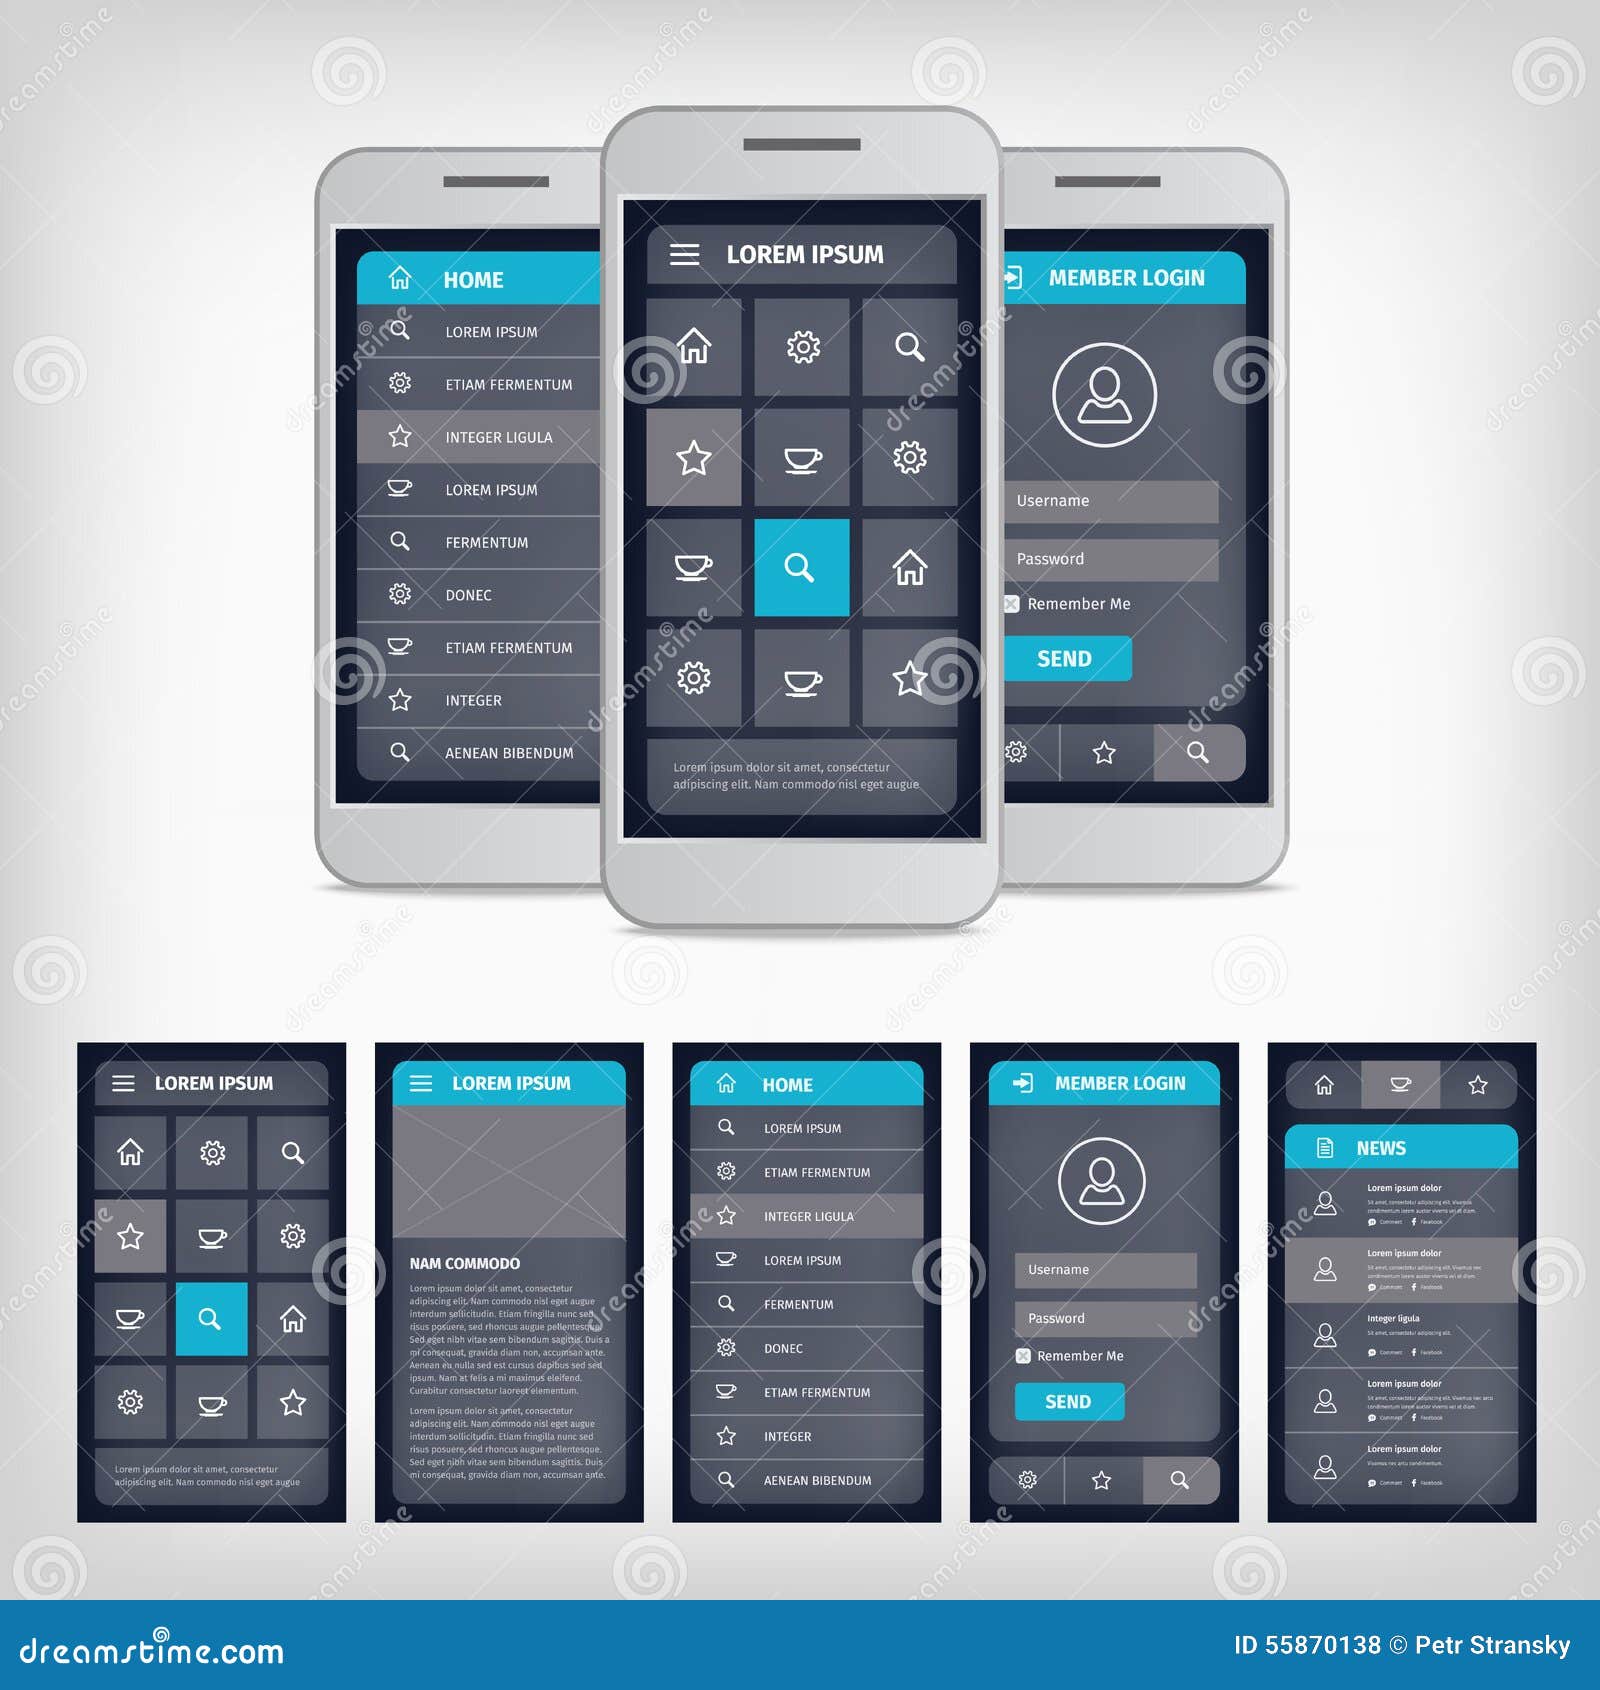 user interface design for mobile applications